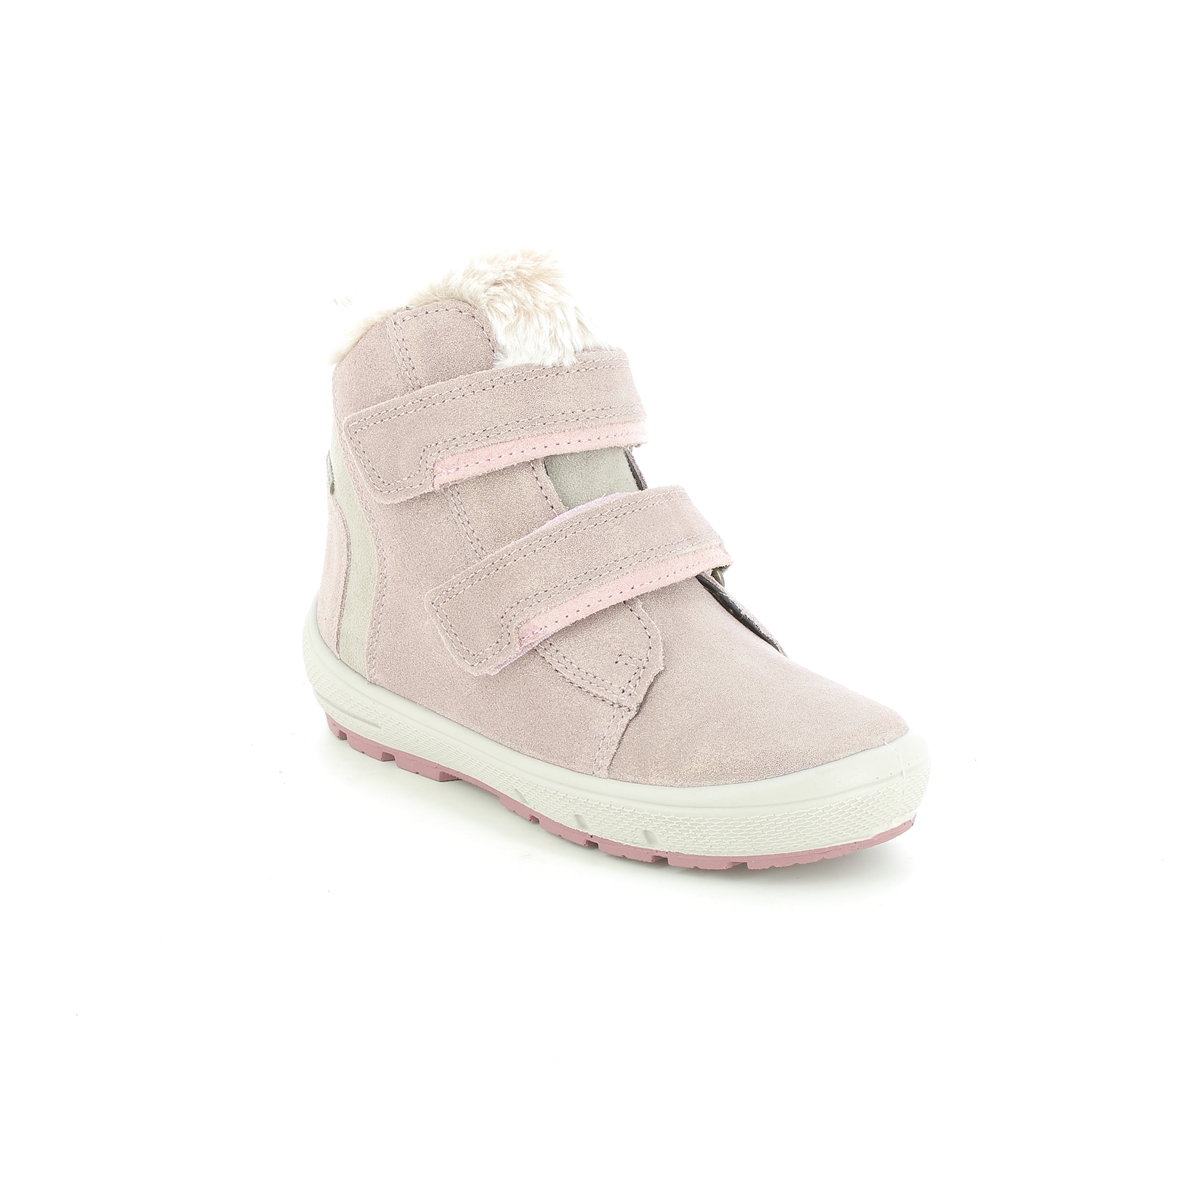 Superfit Groovy Gtx Pink suede Kids Toddler Girls Boots 1006313-5500 in a Plain Leather in Size 23